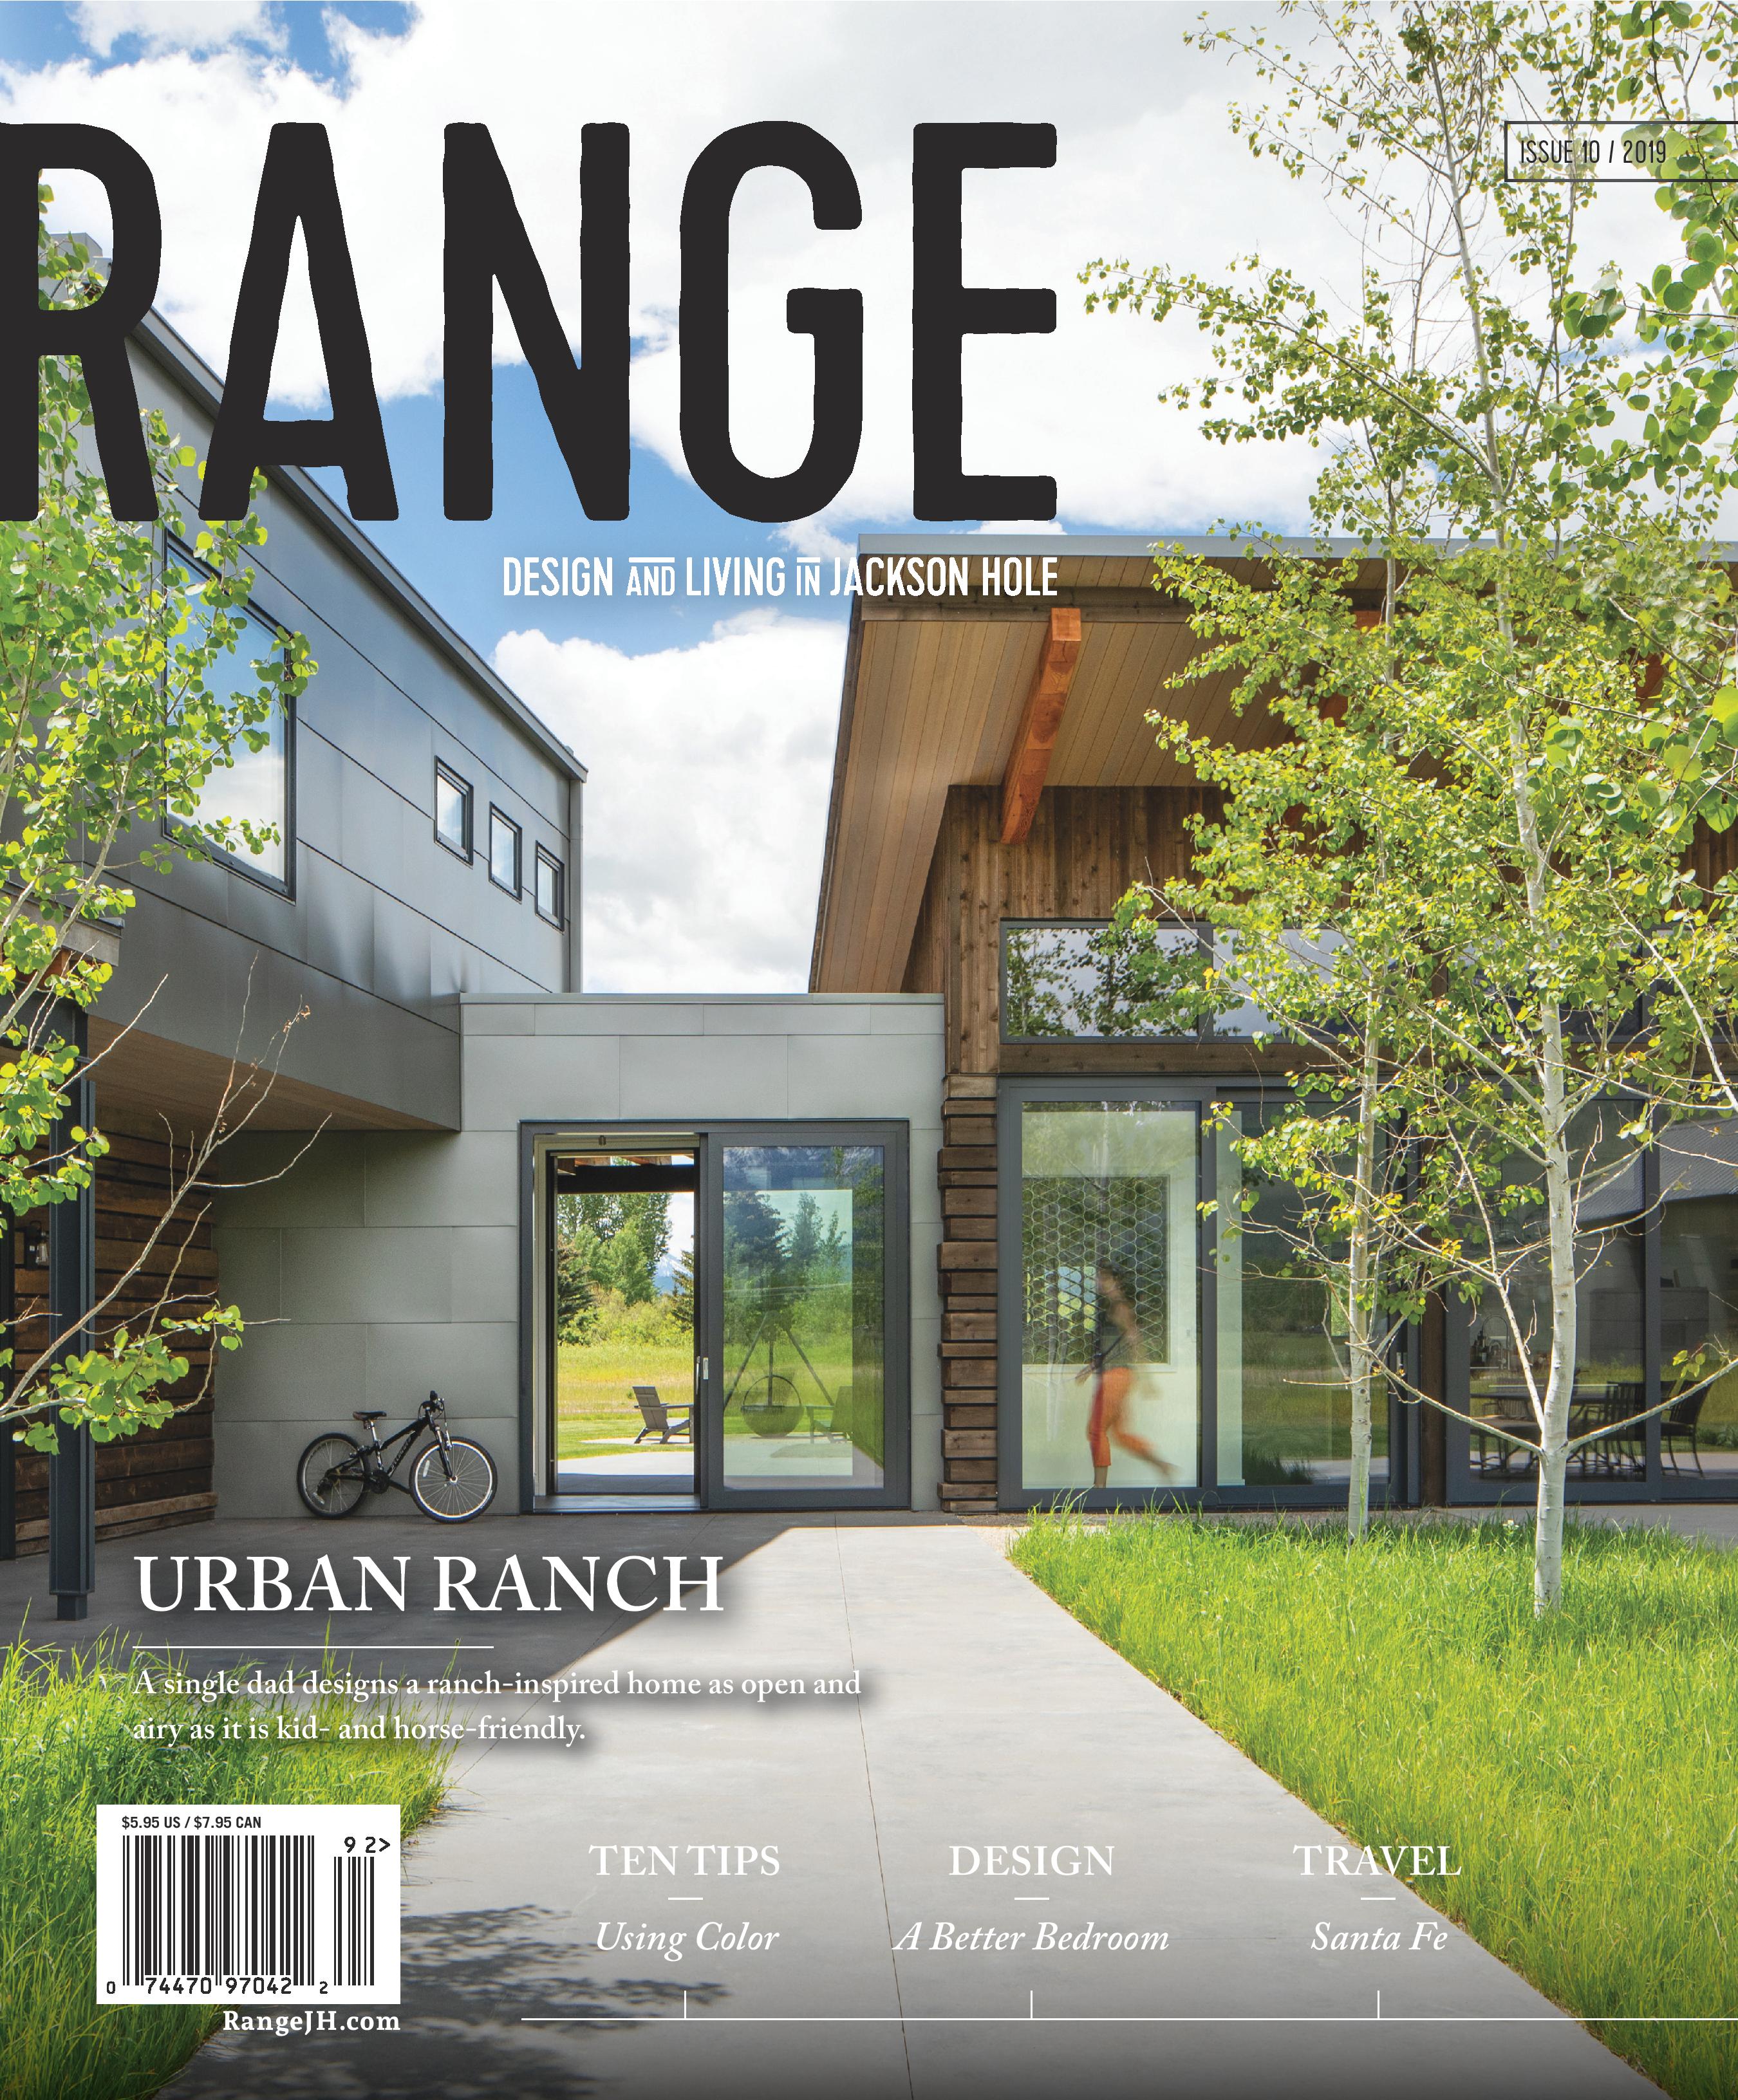 Range Magazine includes MADE in Favorites Section (Issue 10)